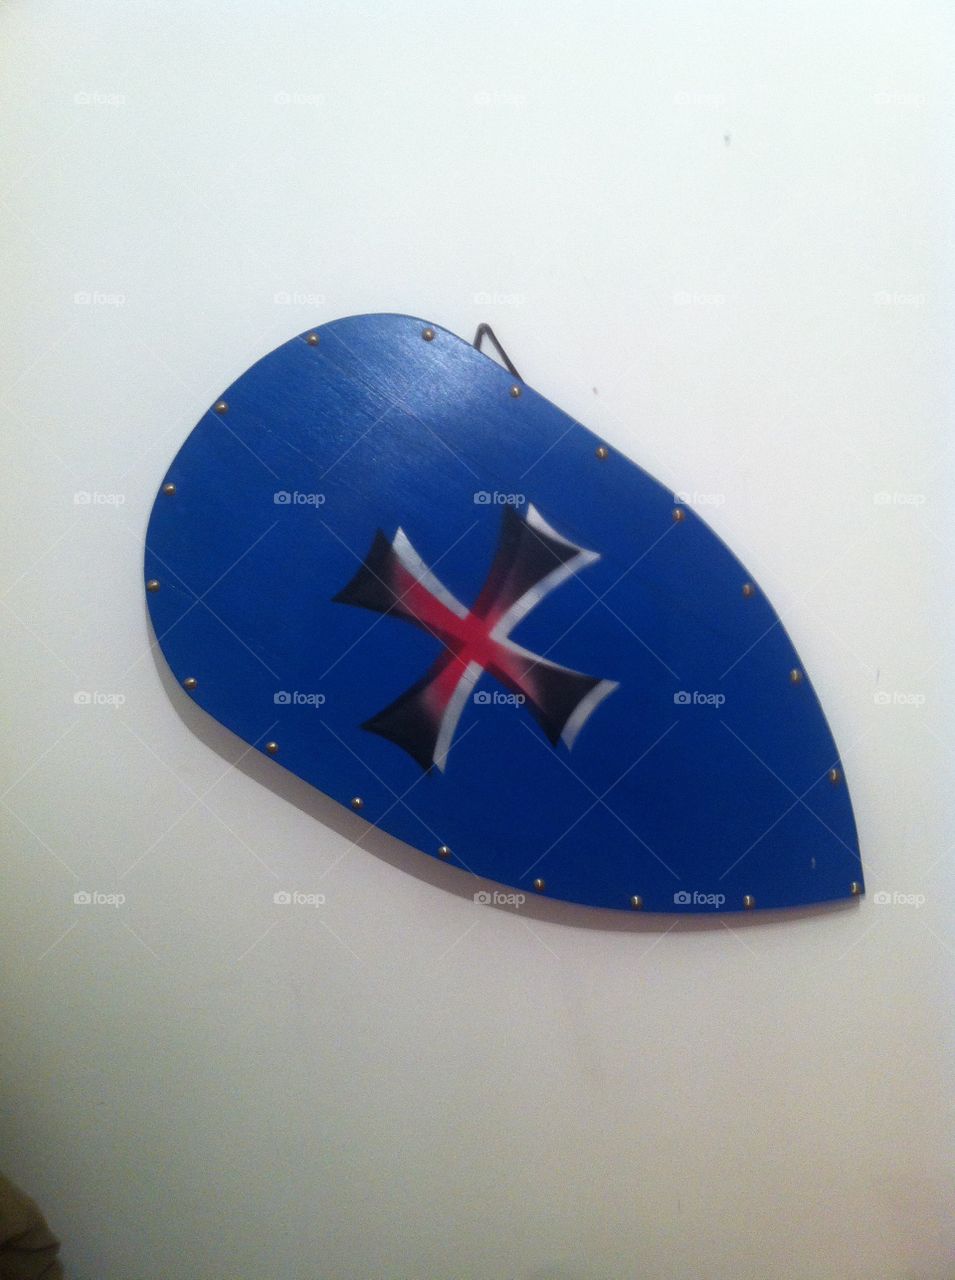 Handmade Crusader Shield. The shield I have on my wall I think its a crusaders. But it is a beautiful wall prop